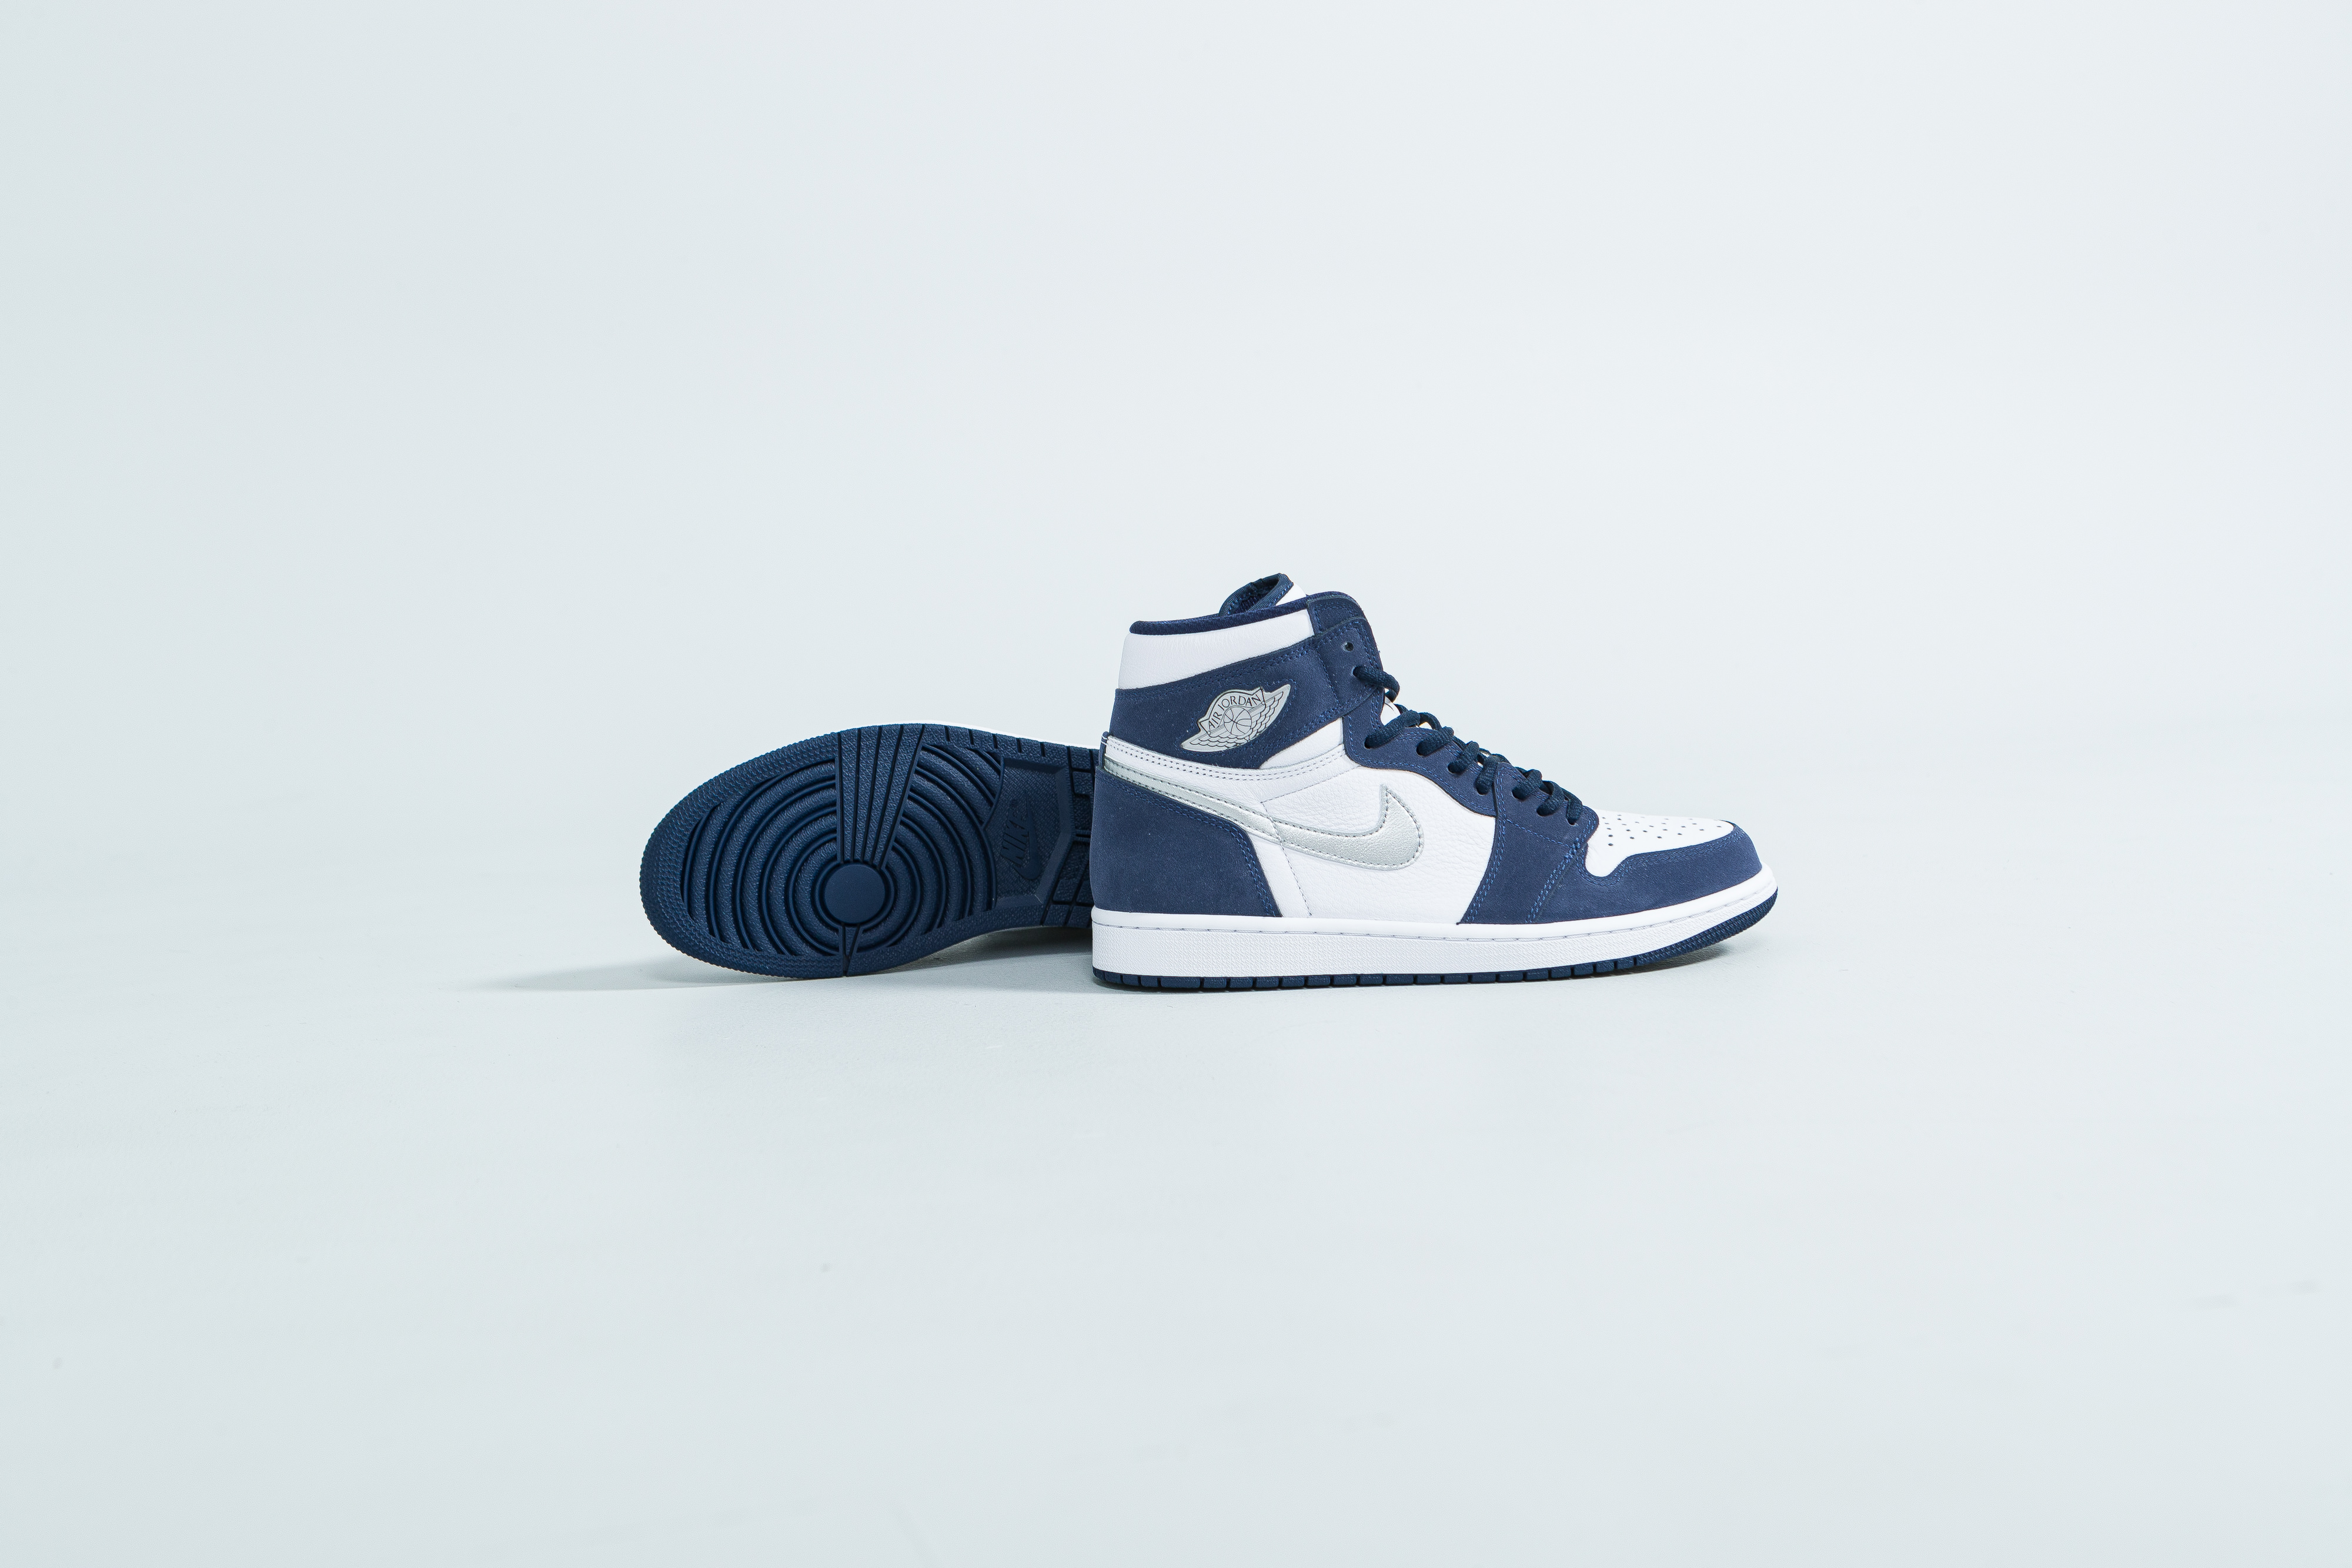 Up There Launches - Nike Air Jordan 1 Retro CO.JP 'Midnight Navy'